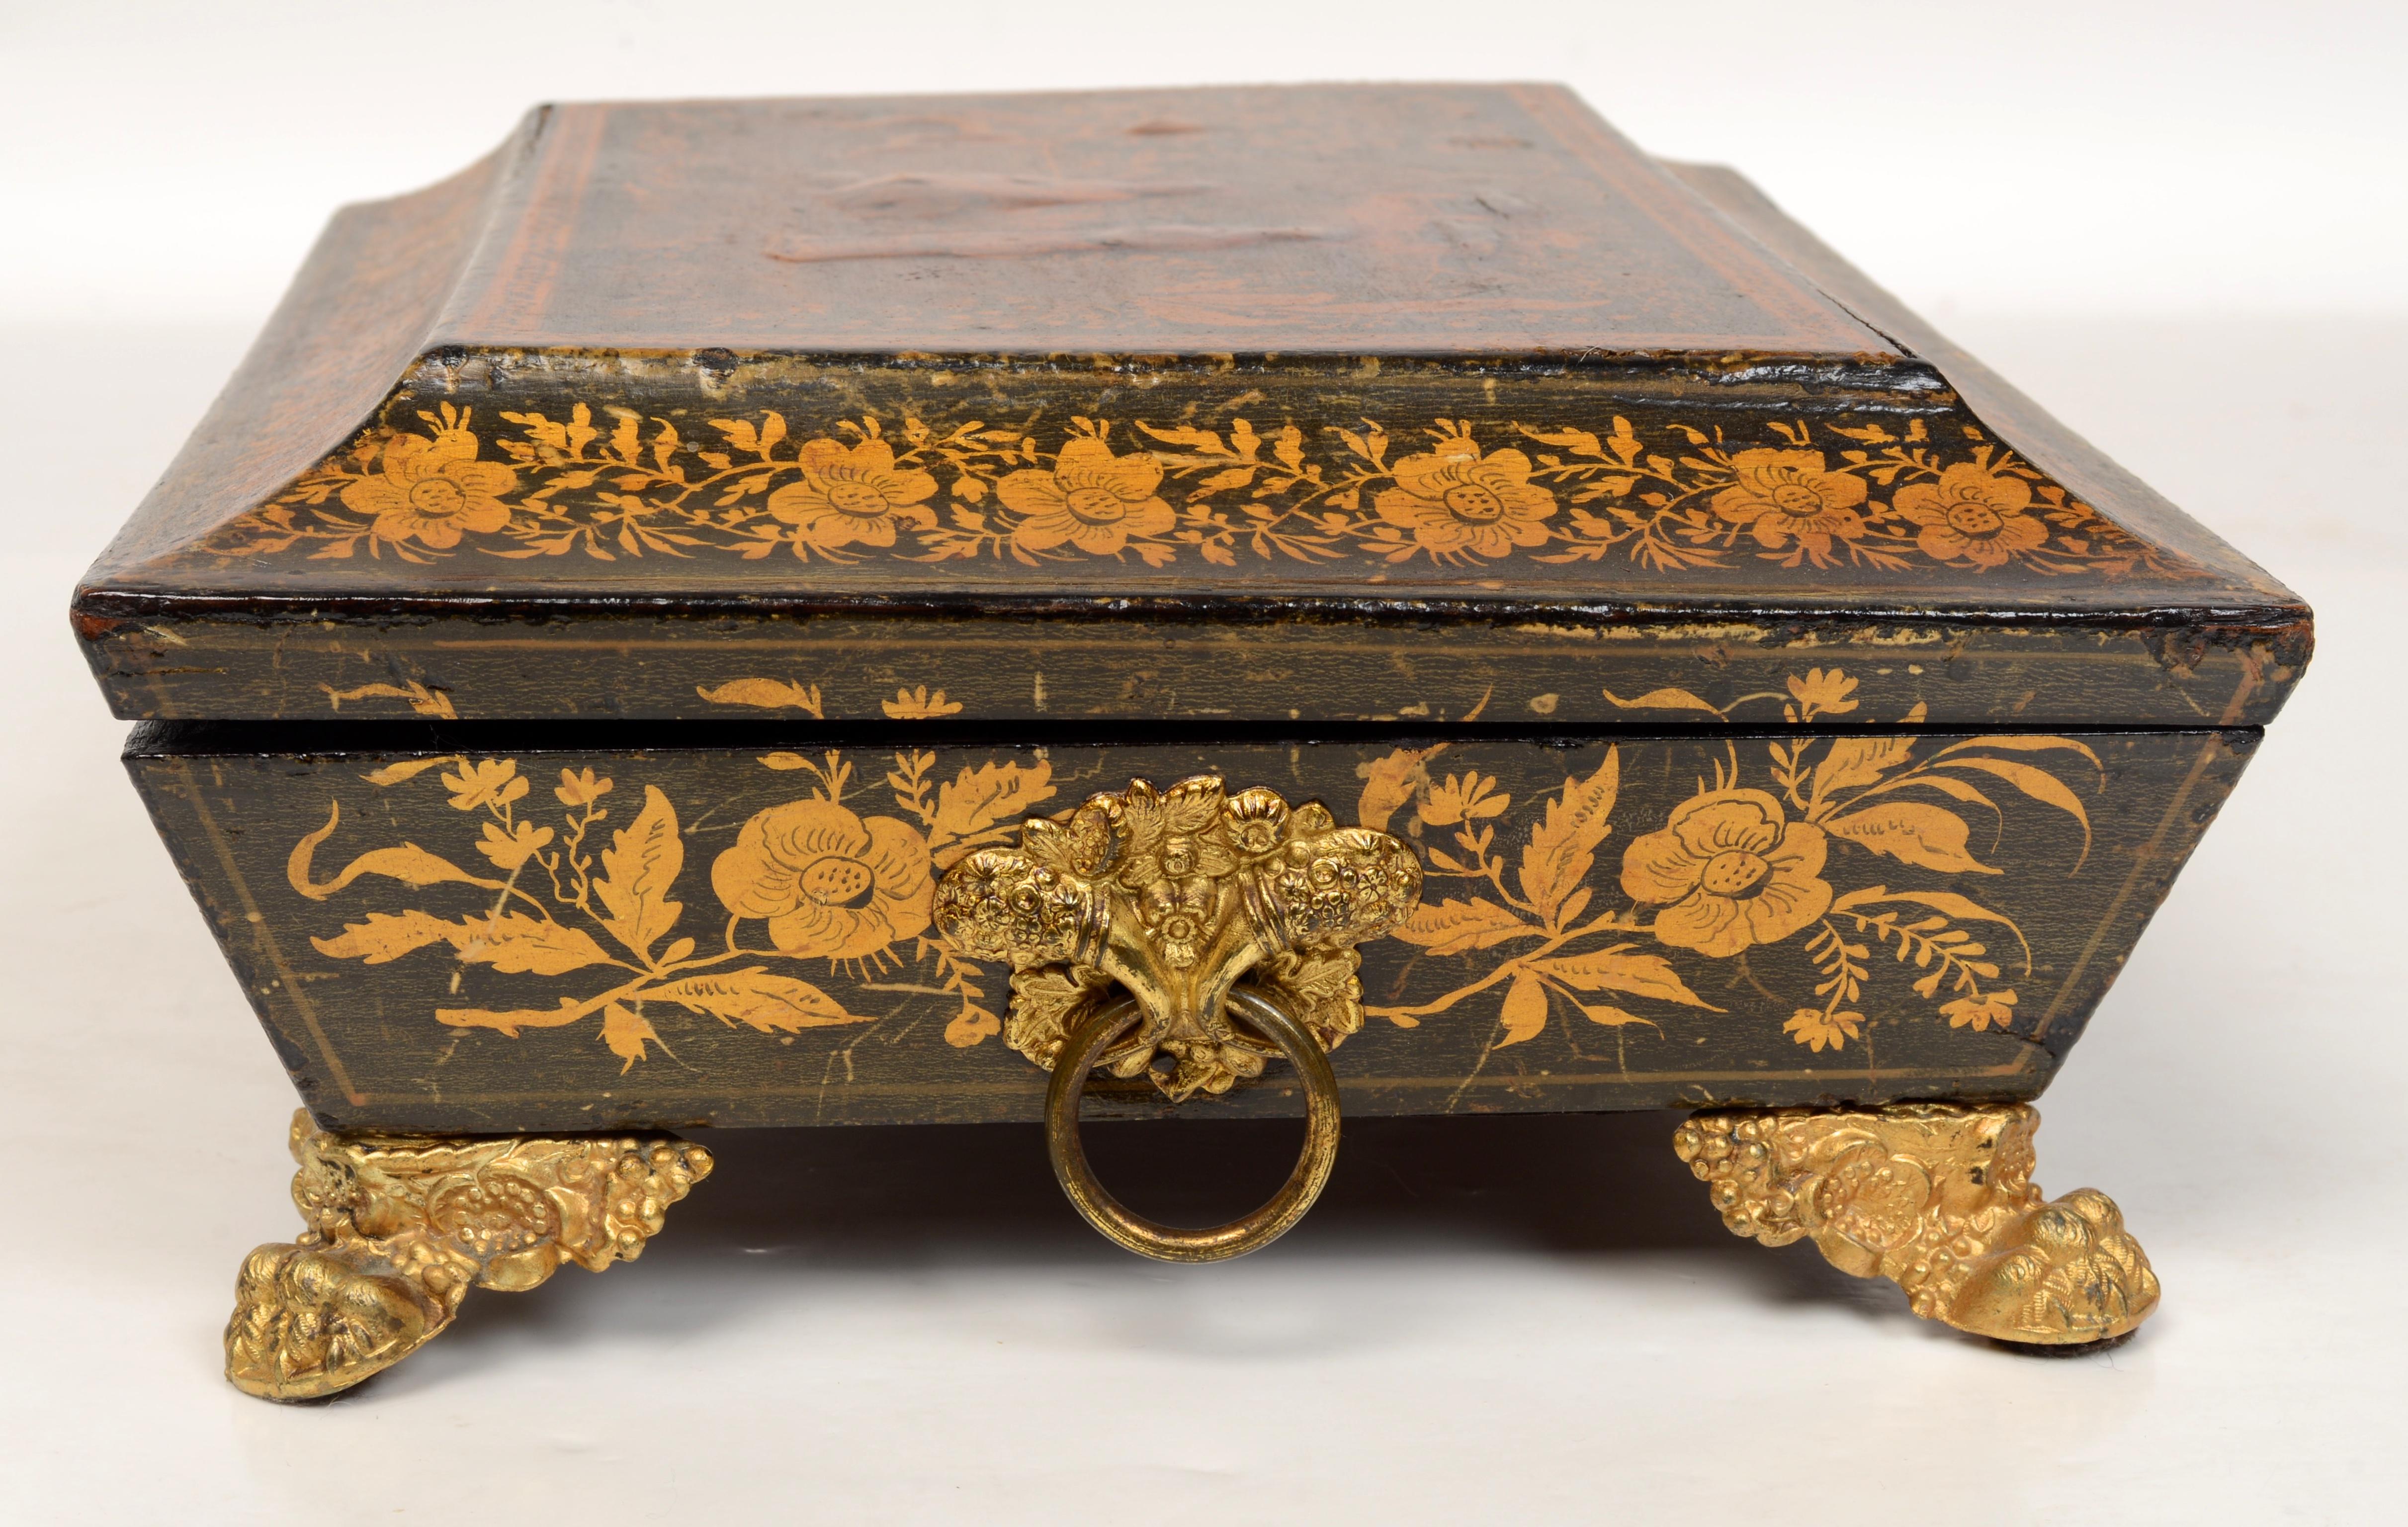 Gilt Regency Chinoiserie & Penwork Decorated Jewelry Box Blue Painted Fitted Interior For Sale